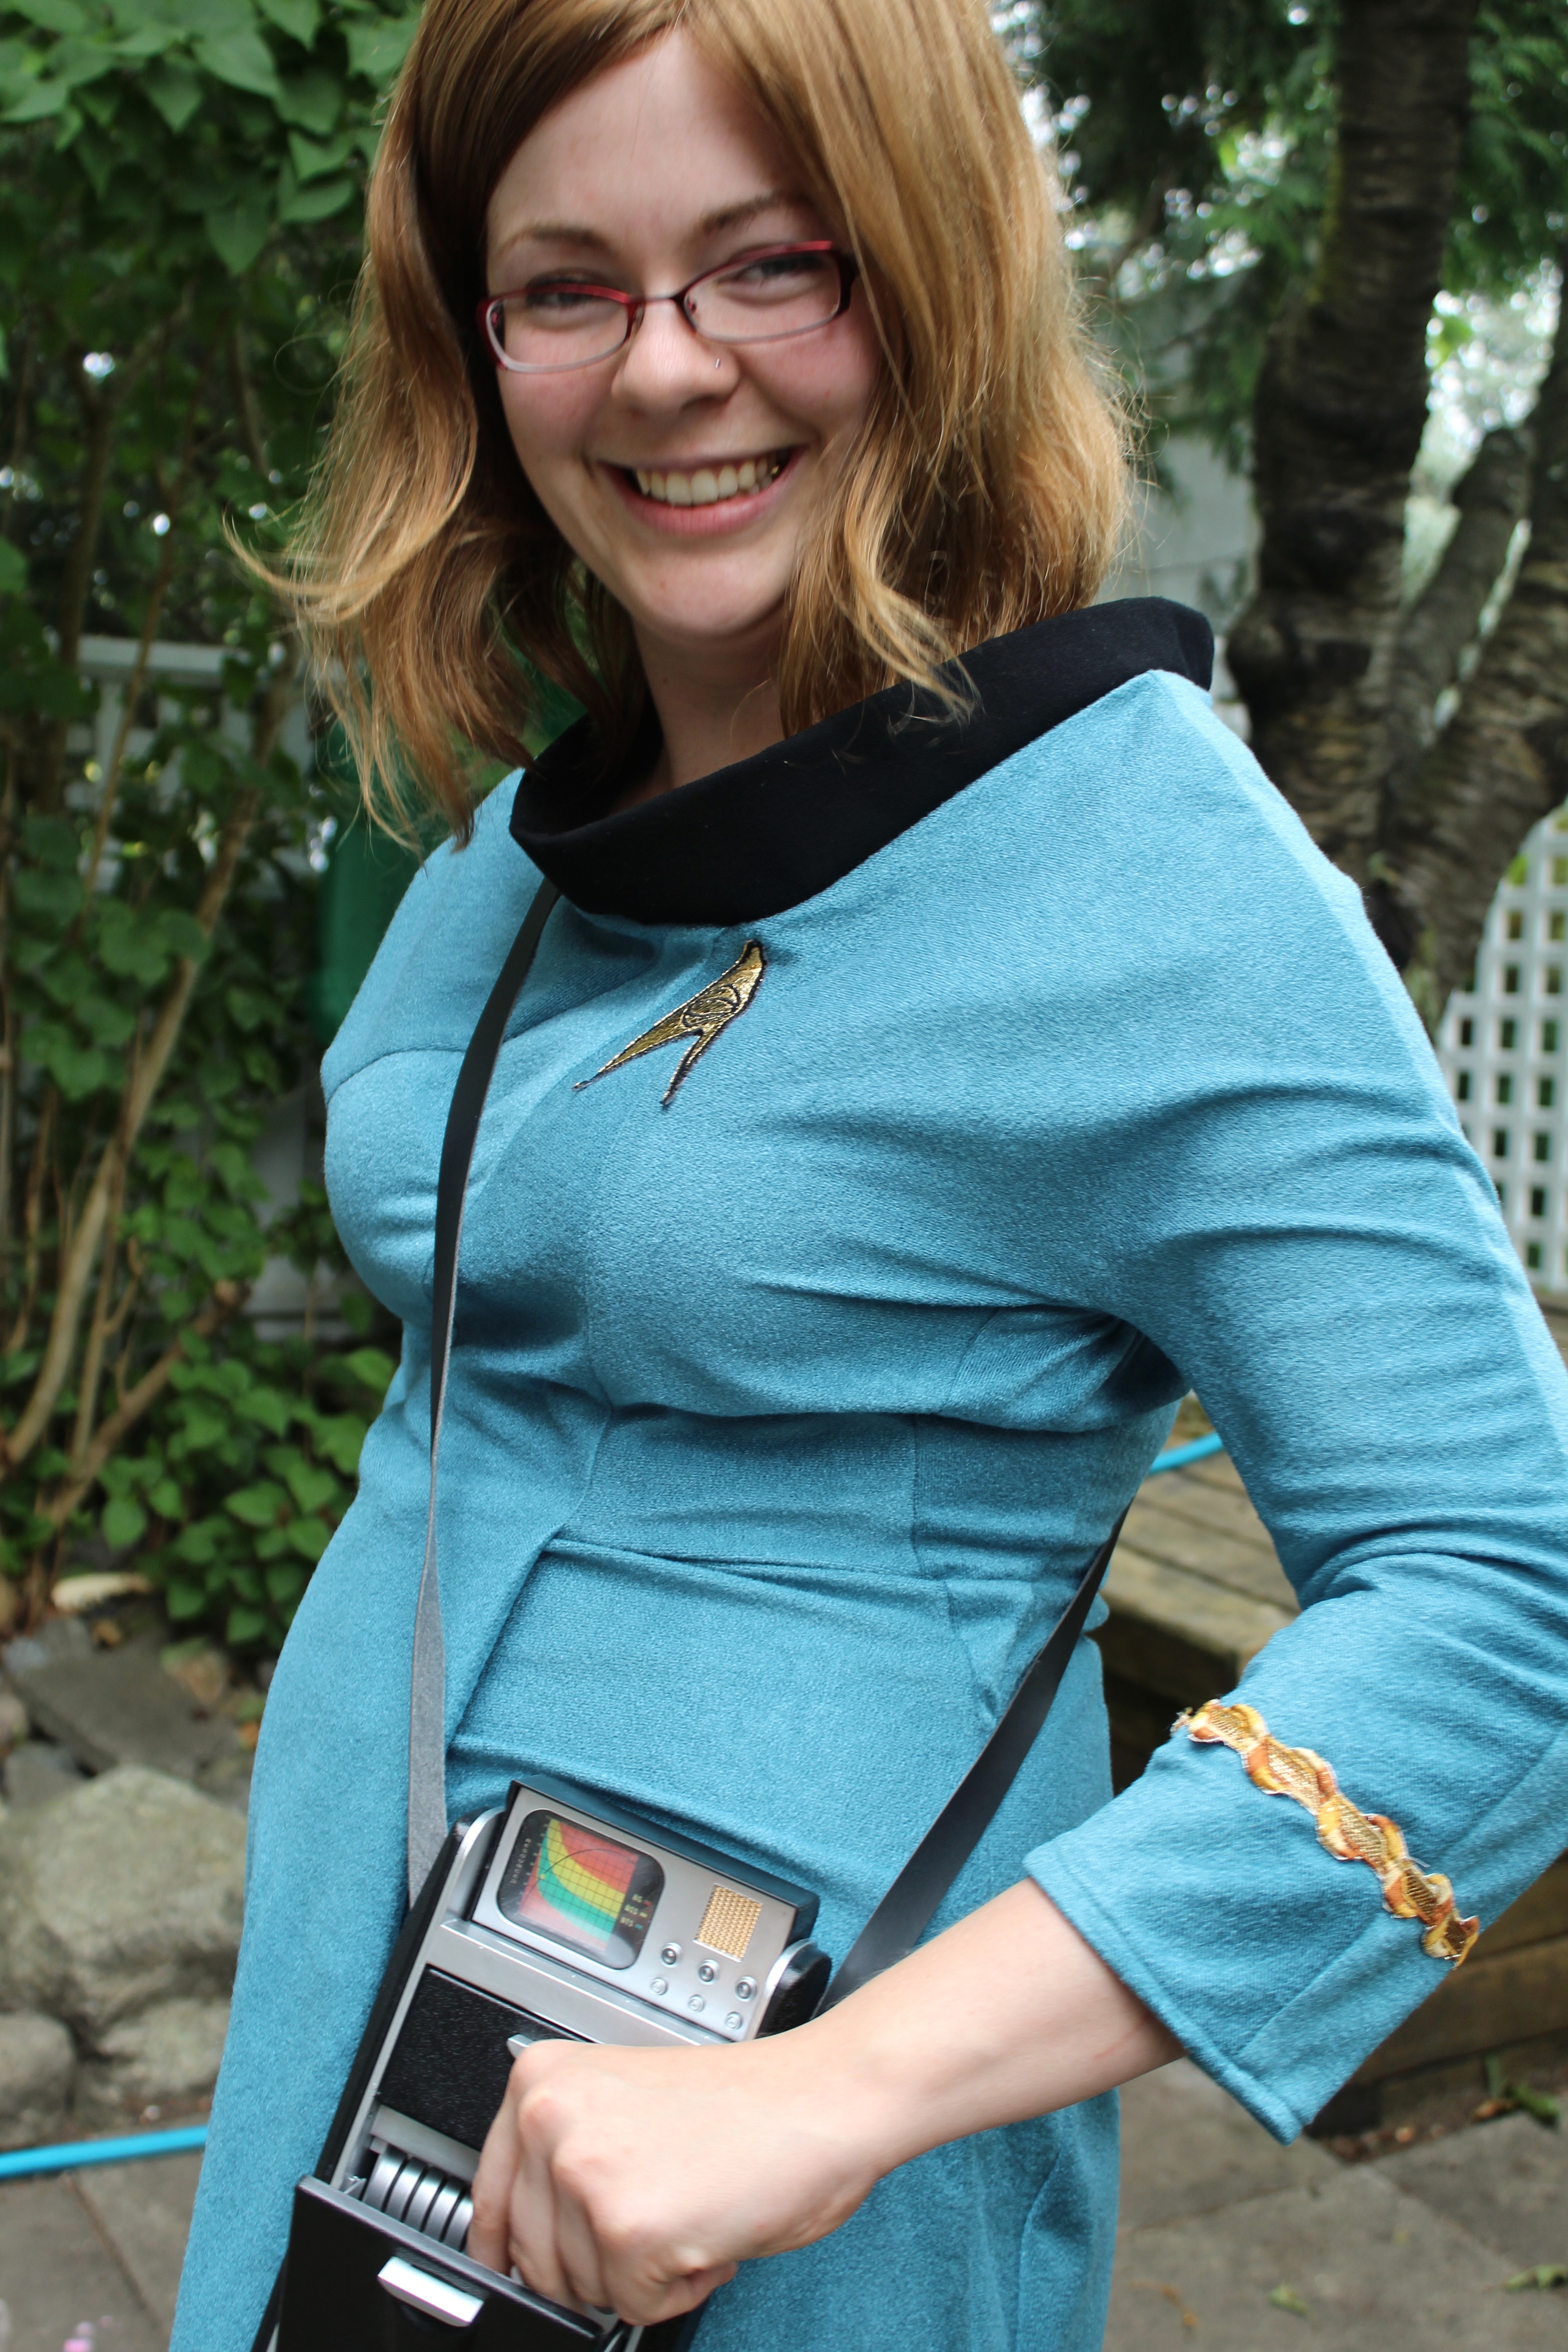 Jarrah in a TOS blue science uniform with tricorder